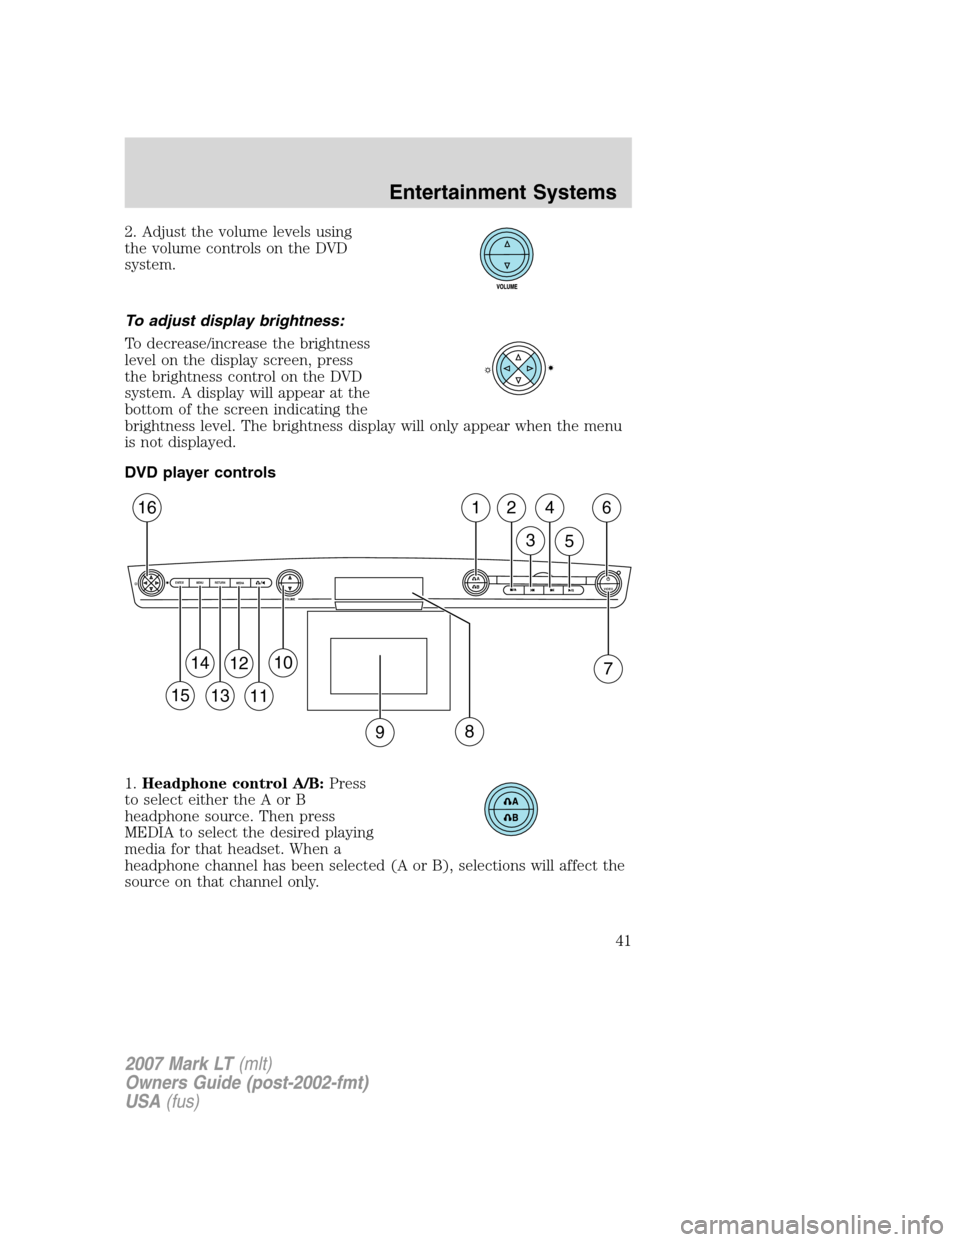 LINCOLN MARK LT 2007 Service Manual 2. Adjust the volume levels using
the volume controls on the DVD
system.
To adjust display brightness:
To decrease/increase the brightness
level on the display screen, press
the brightness control on 